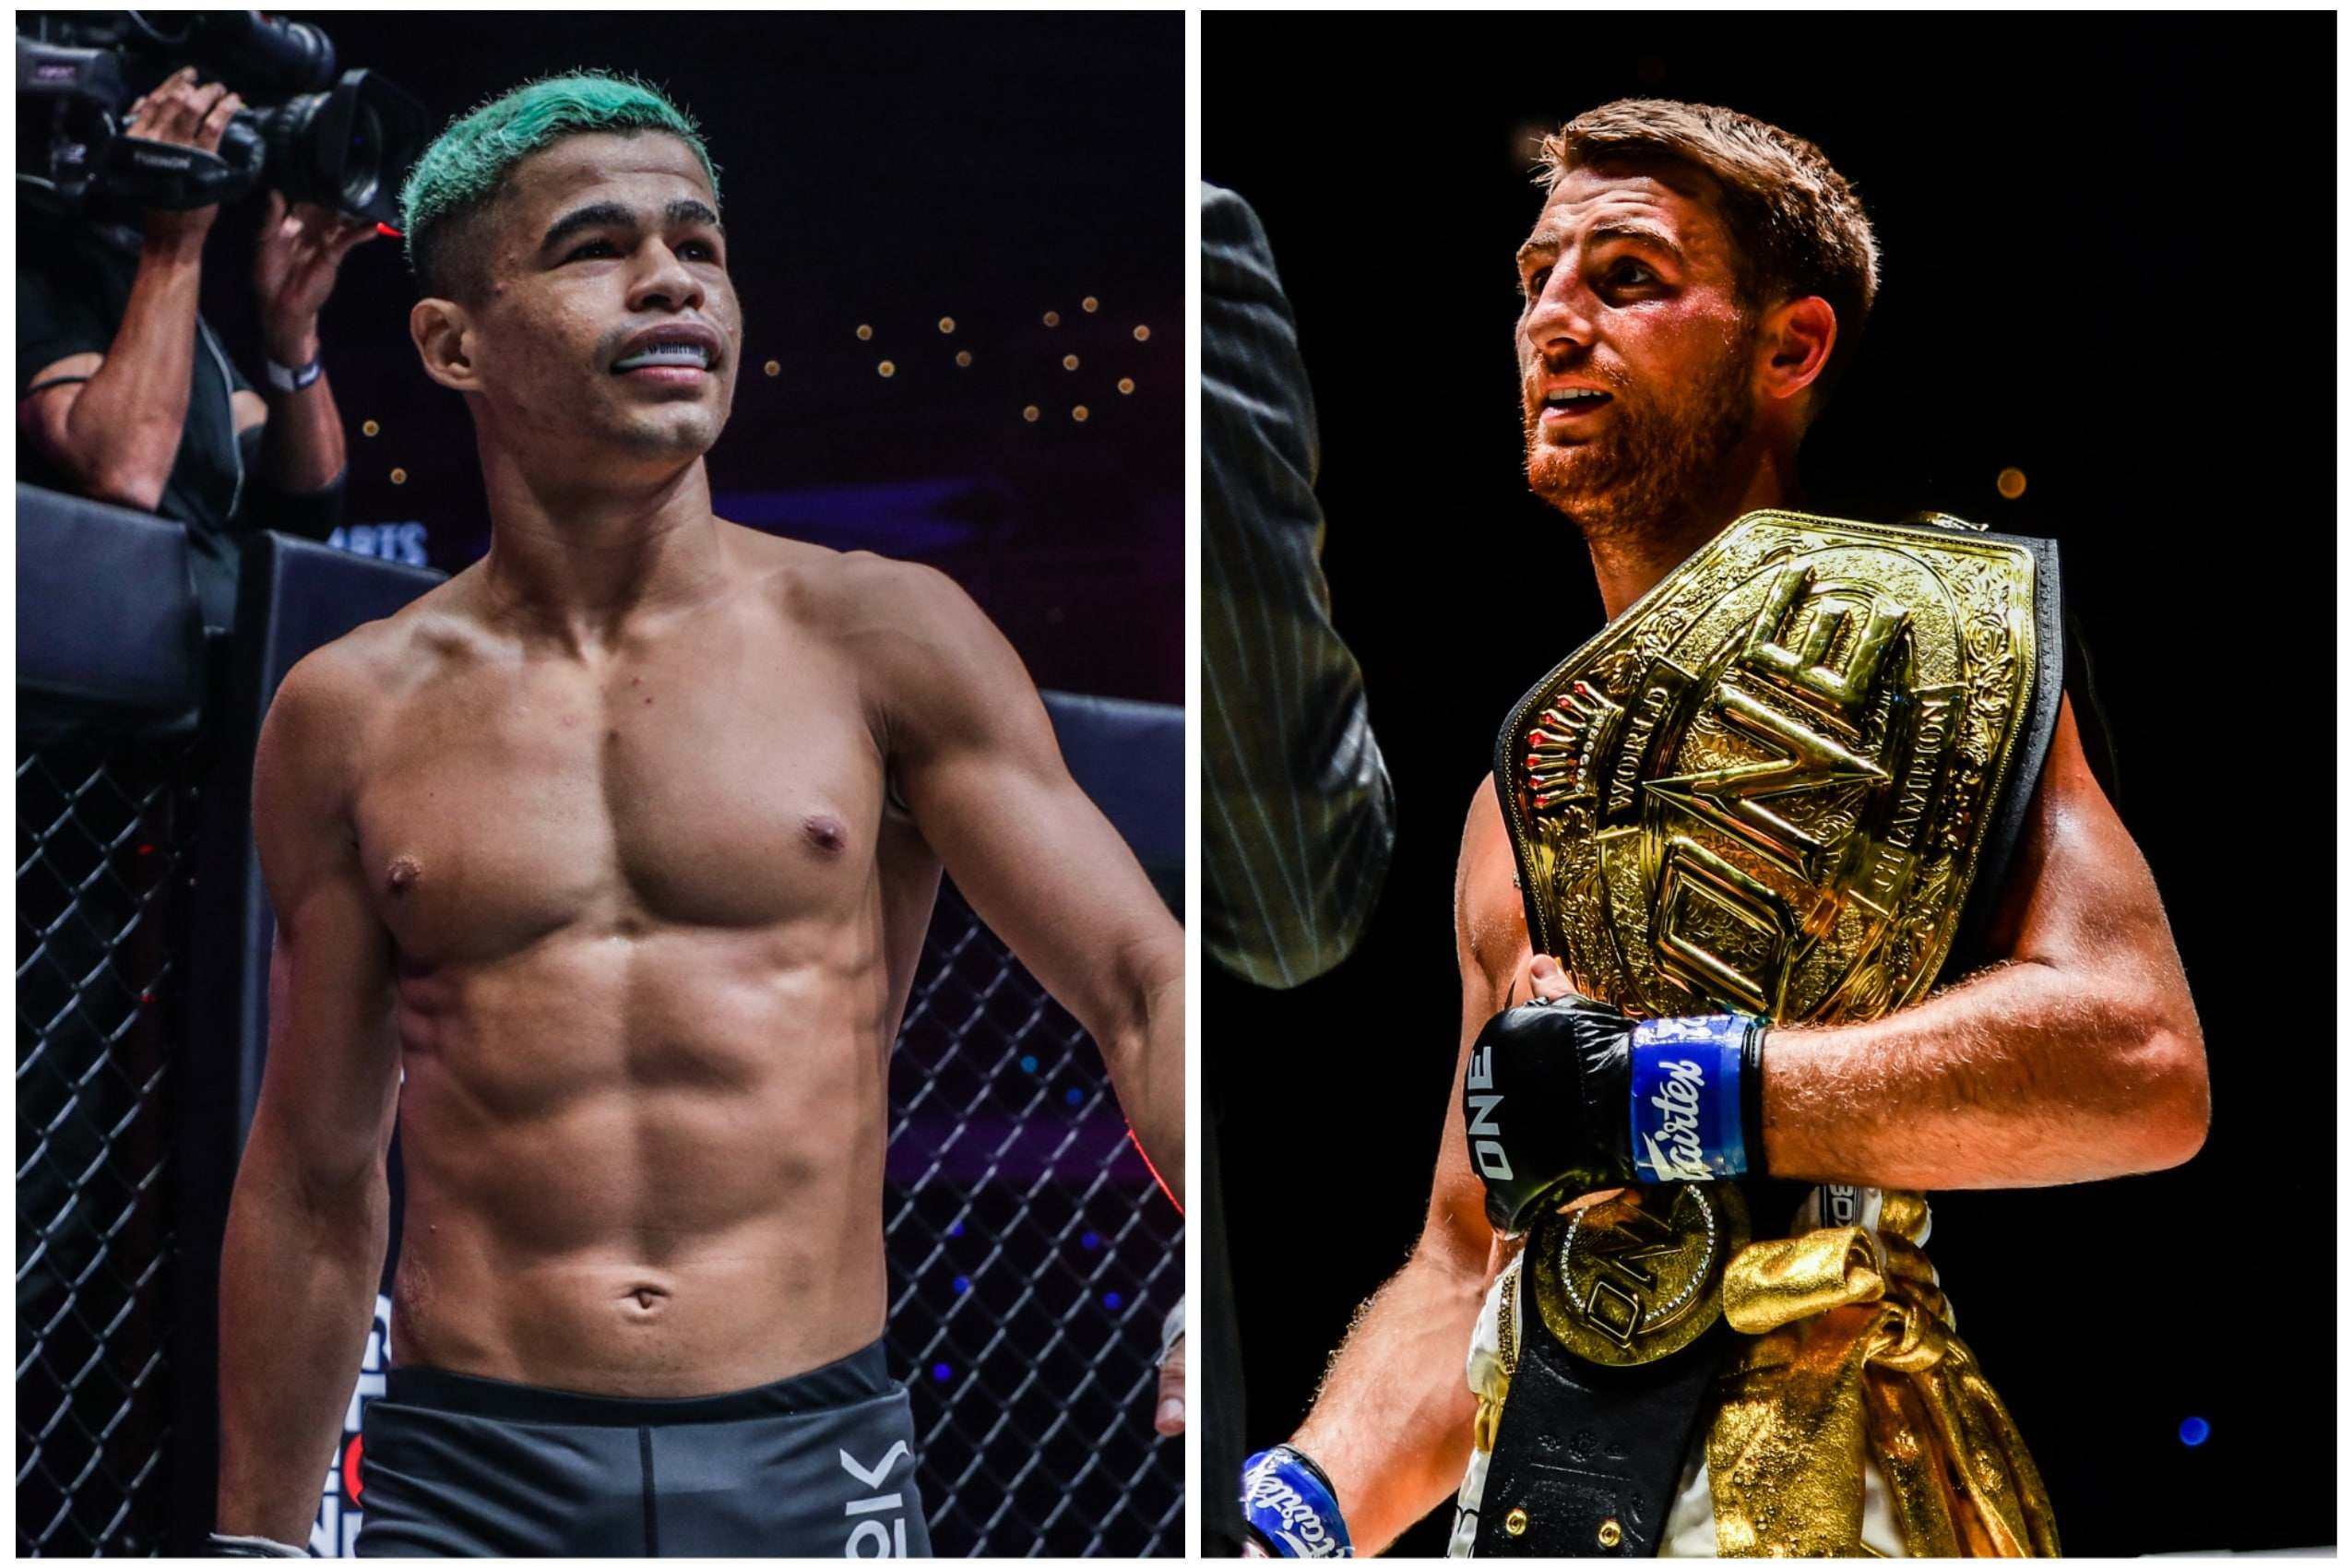 Fabricio Andrade (left) will fight Jonathan Haggerty for the vacant bantamweight kickboxing title in November. Photos: ONE Championship